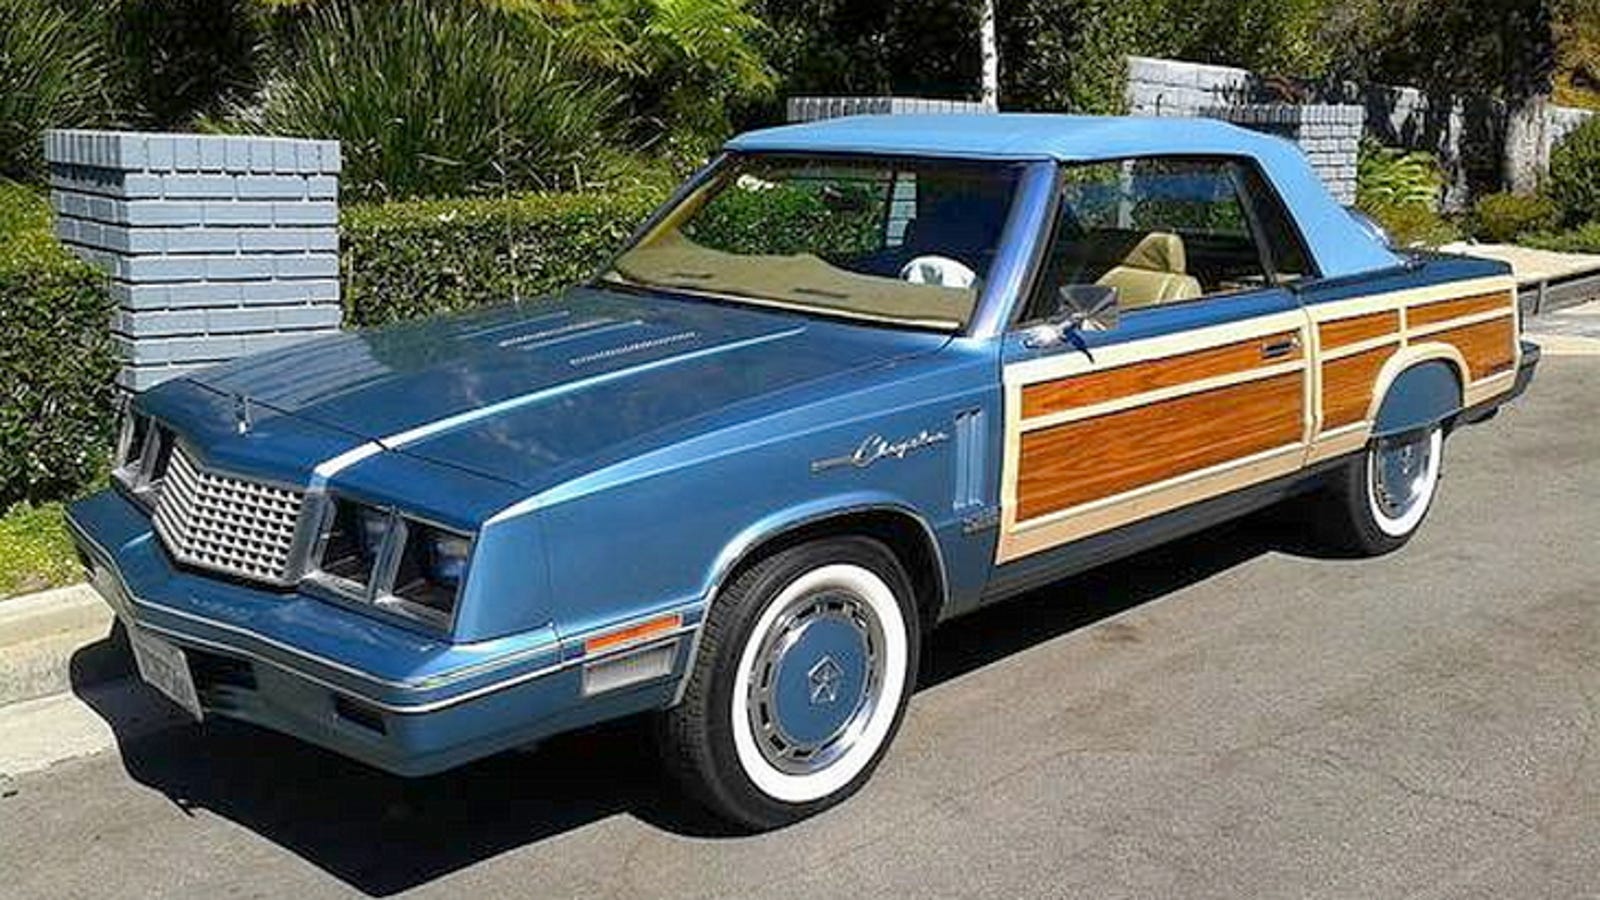 For 9,500, This 1985 Chrysler LeBaron Is Your Special K